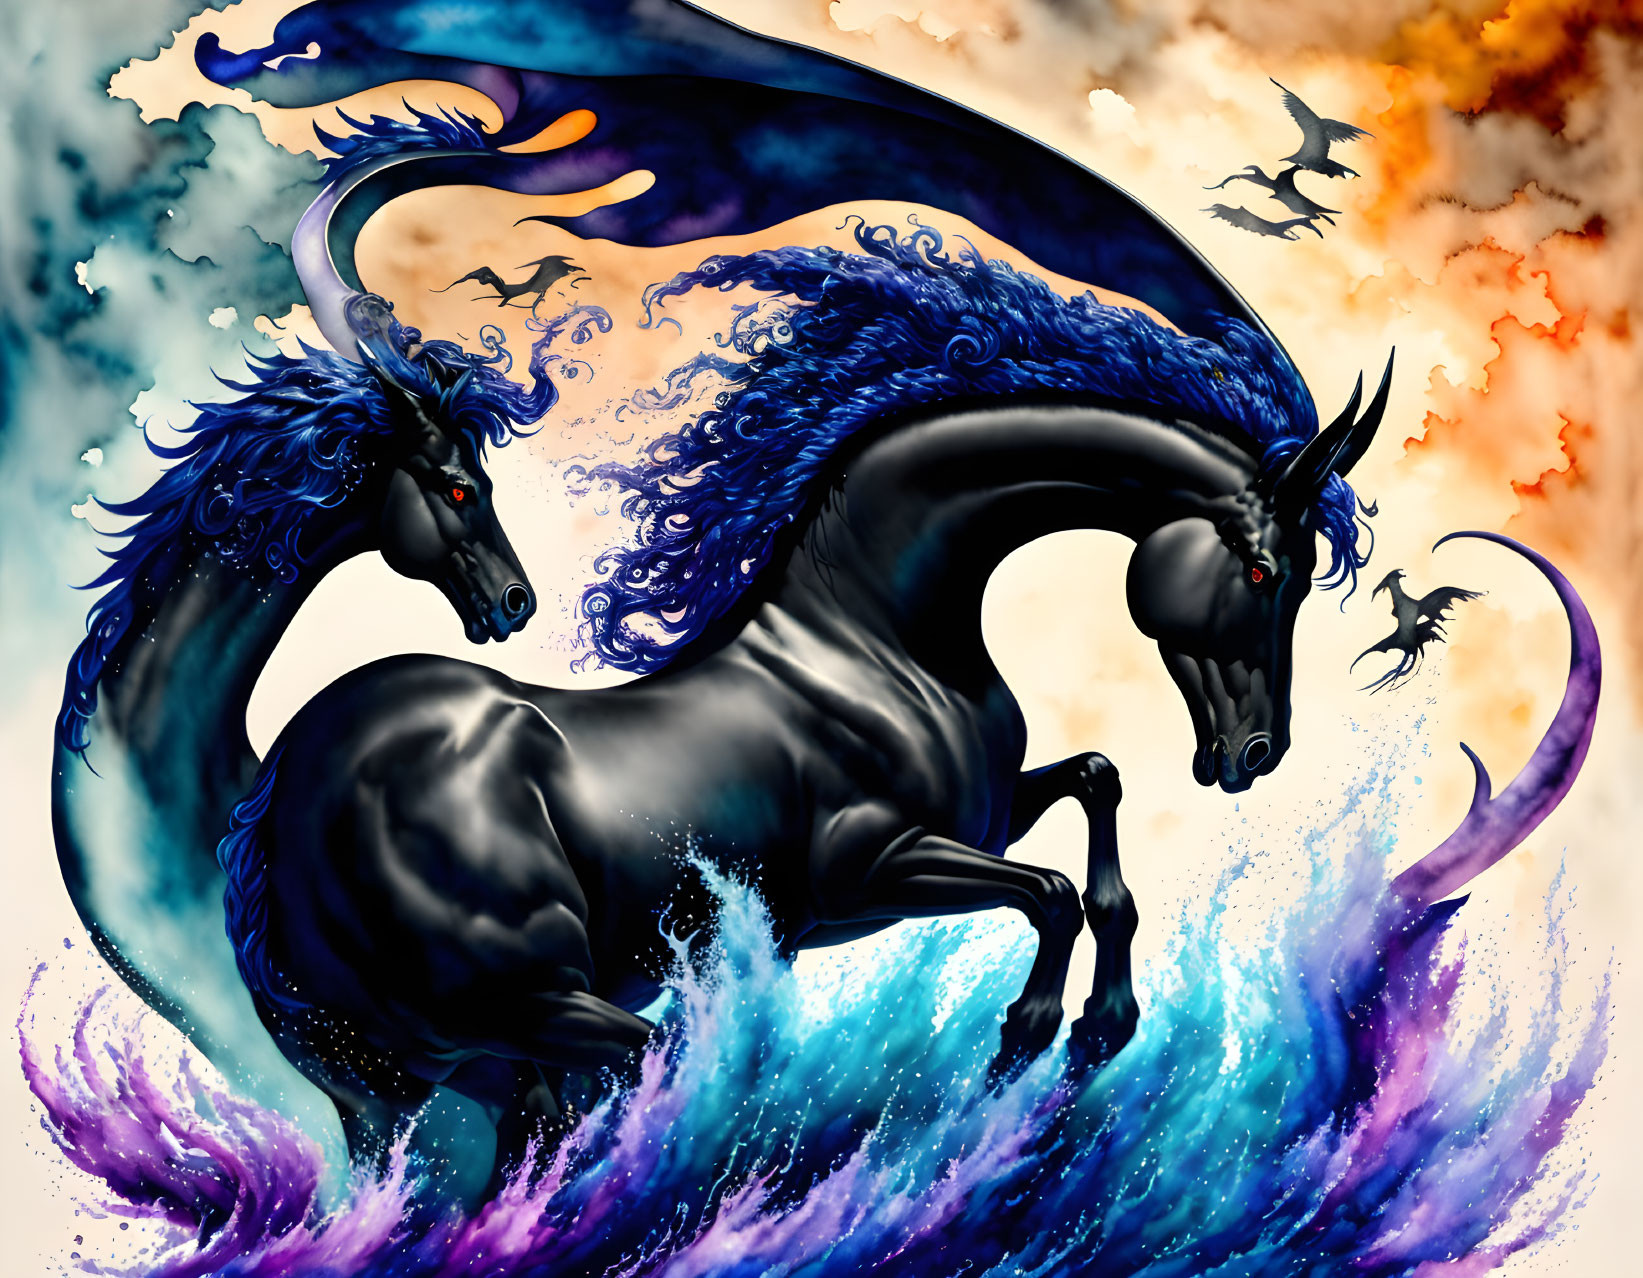 Black Horse with Blue Flames Mane and Dragons in Vibrant Scene